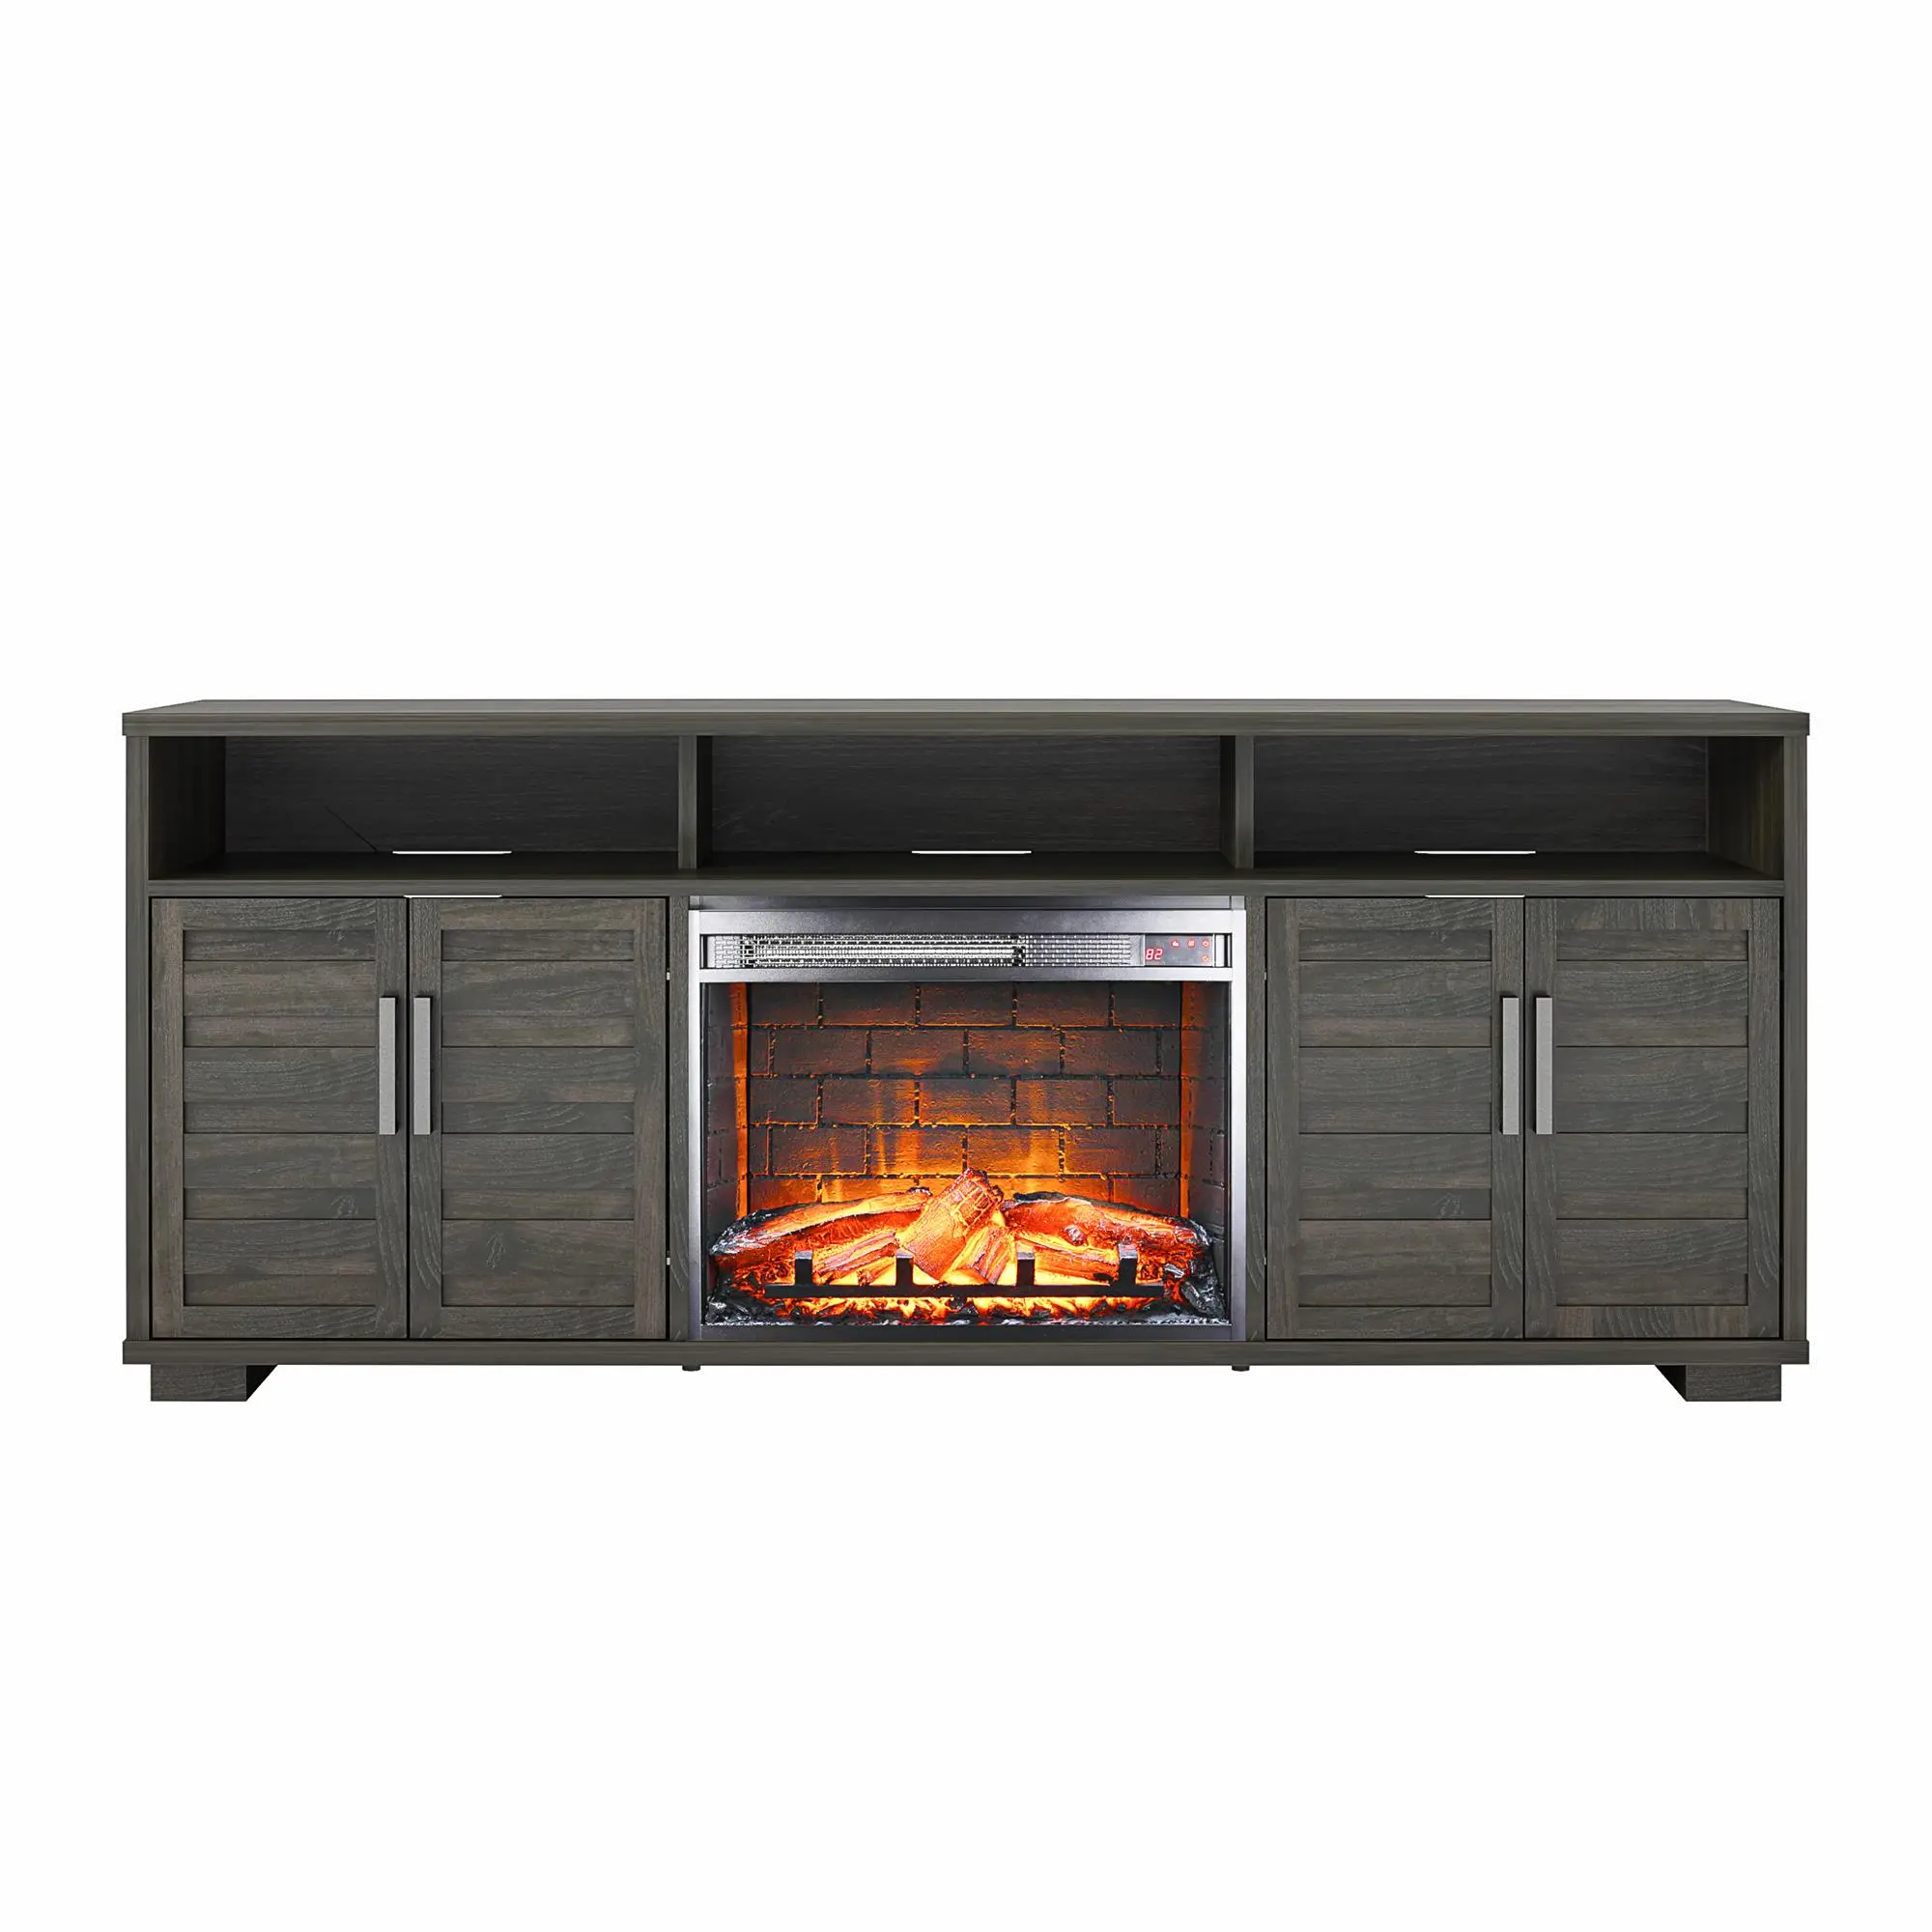 Flintrock Espresso 75" TV Stand with Electric Fireplace